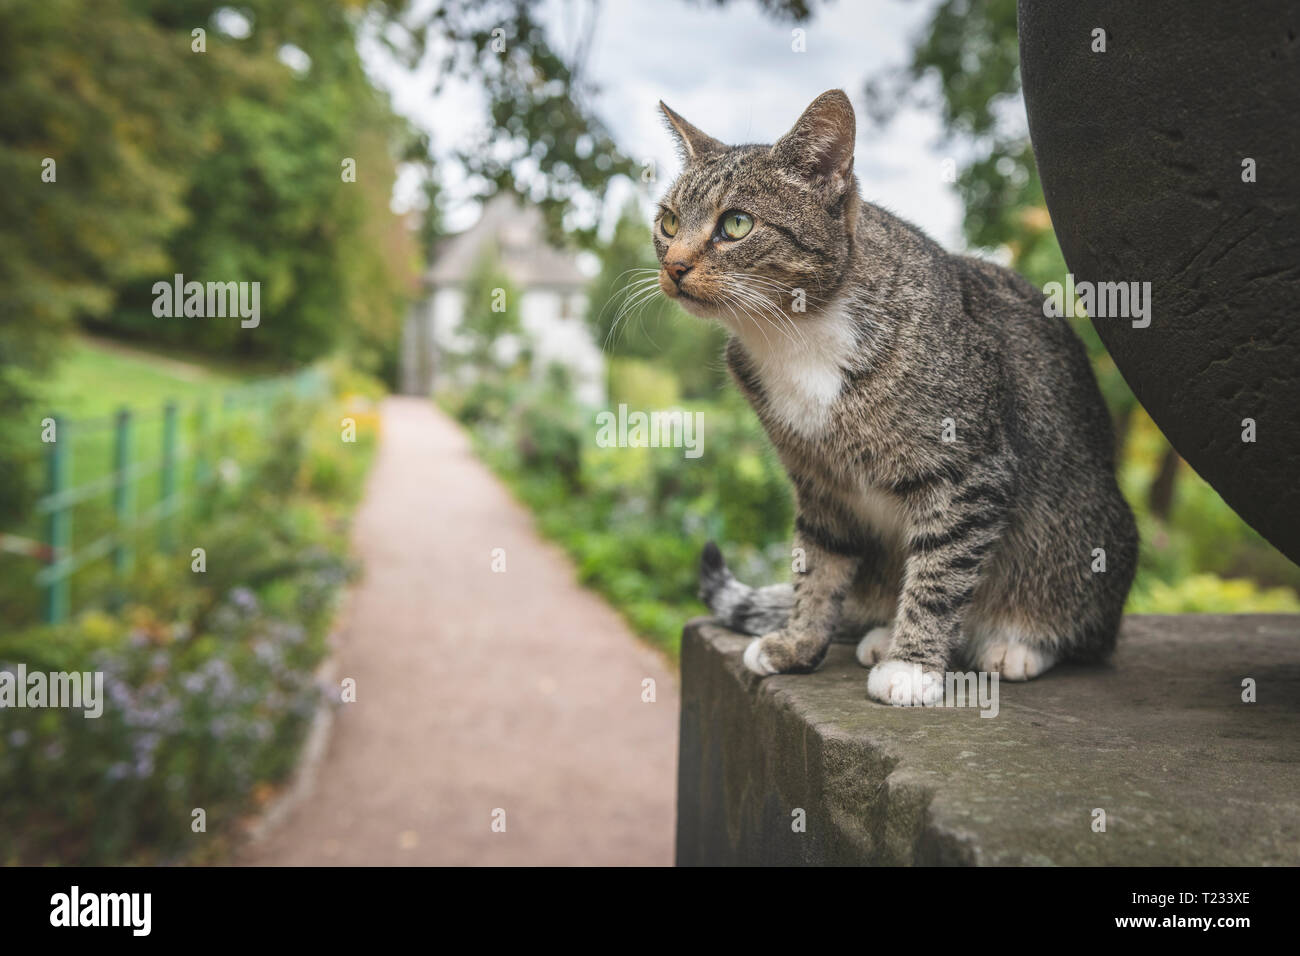 Germany, Weimar, portrait of tabby cat with Goethe Gartenhaus at Ilmpark in the background Stock Photo